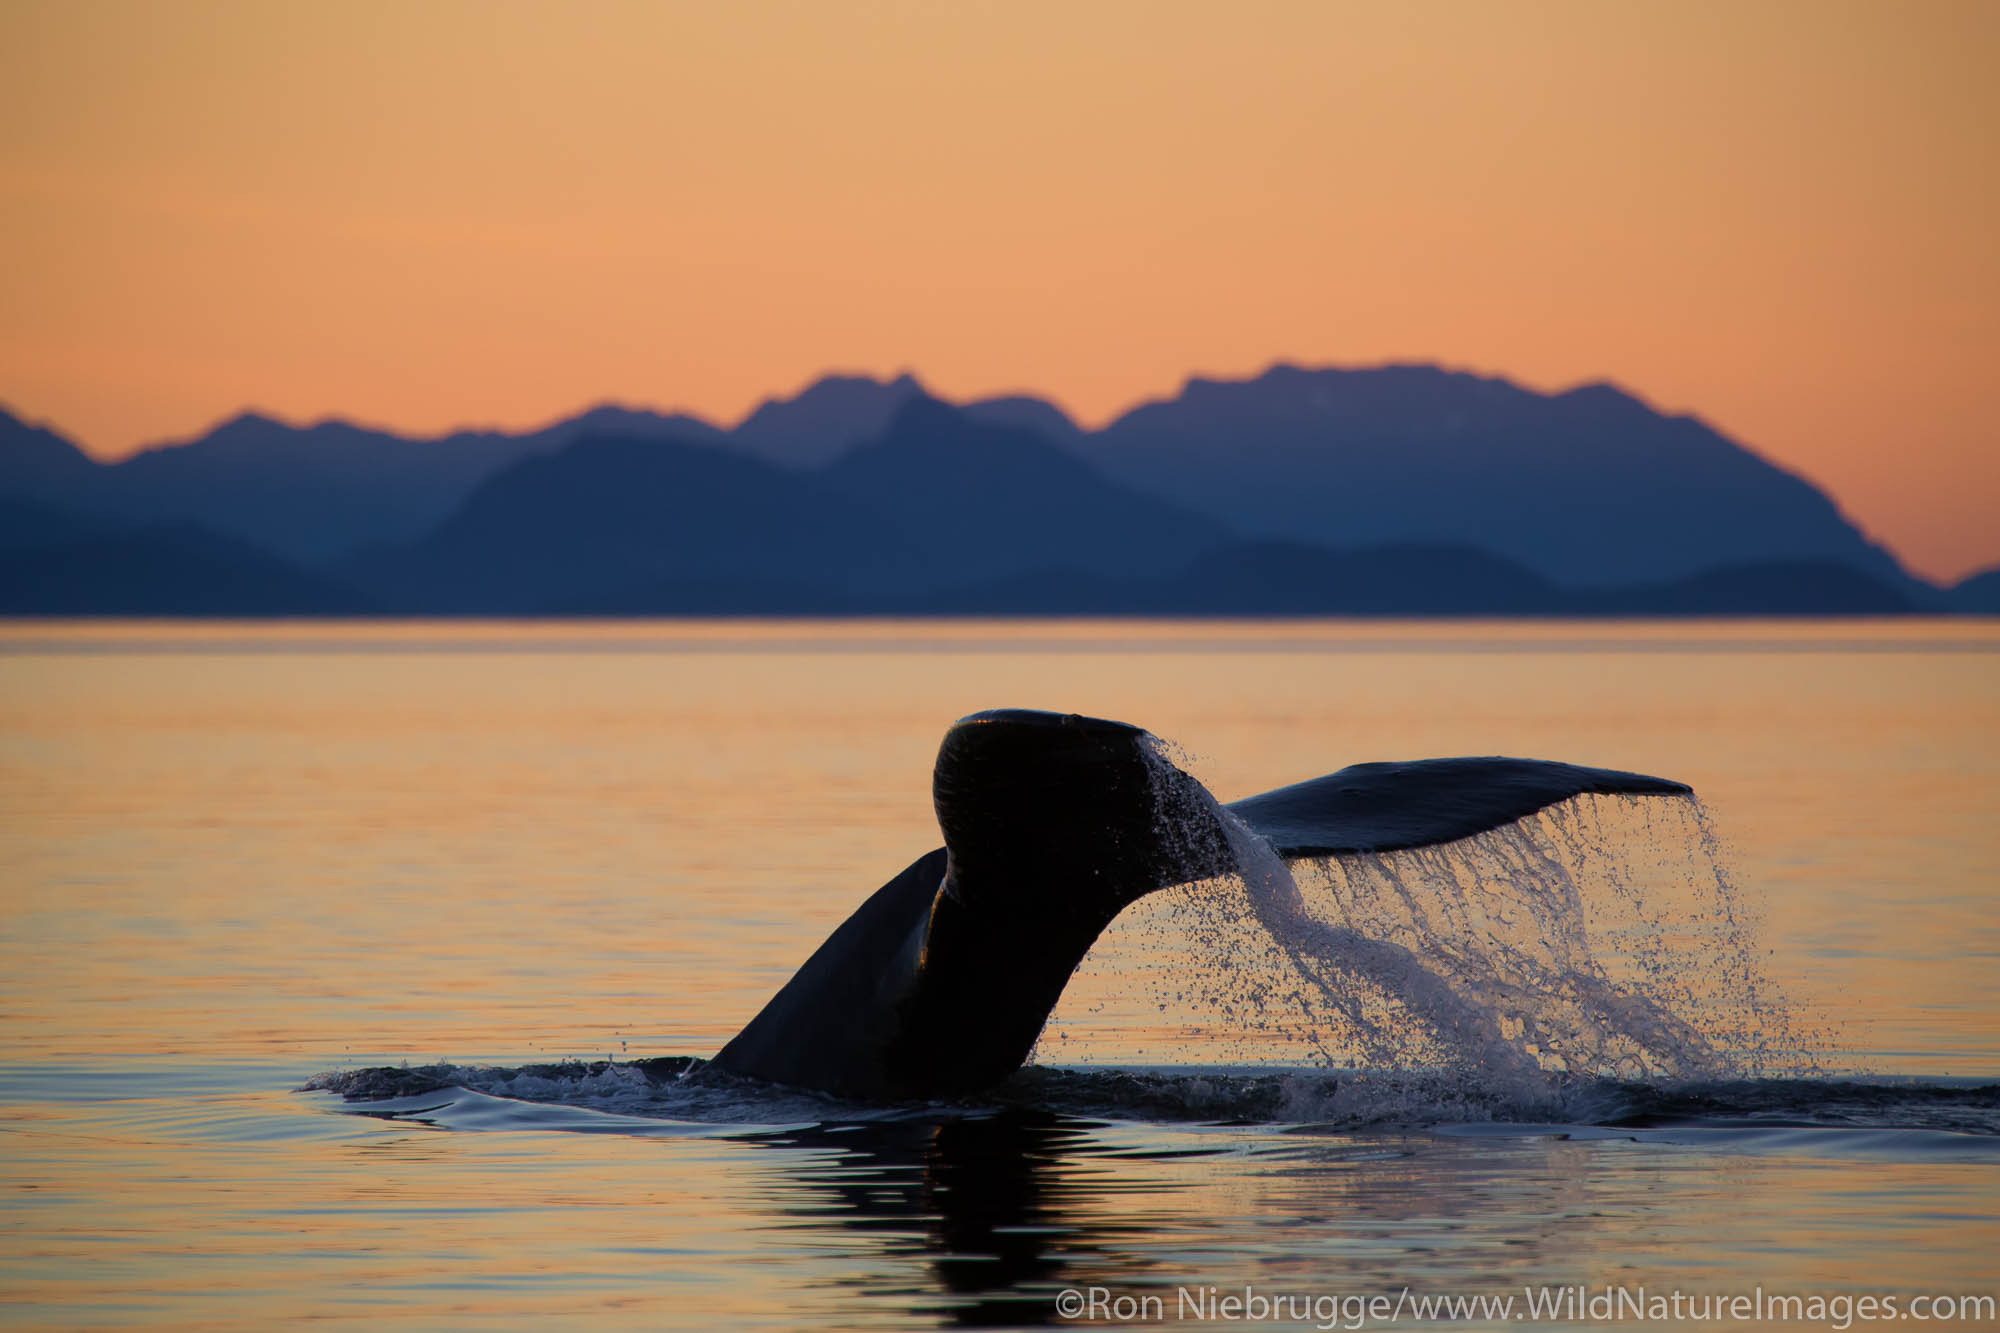 Humpback whale at sunset, Tongass National Forest, Alaska.